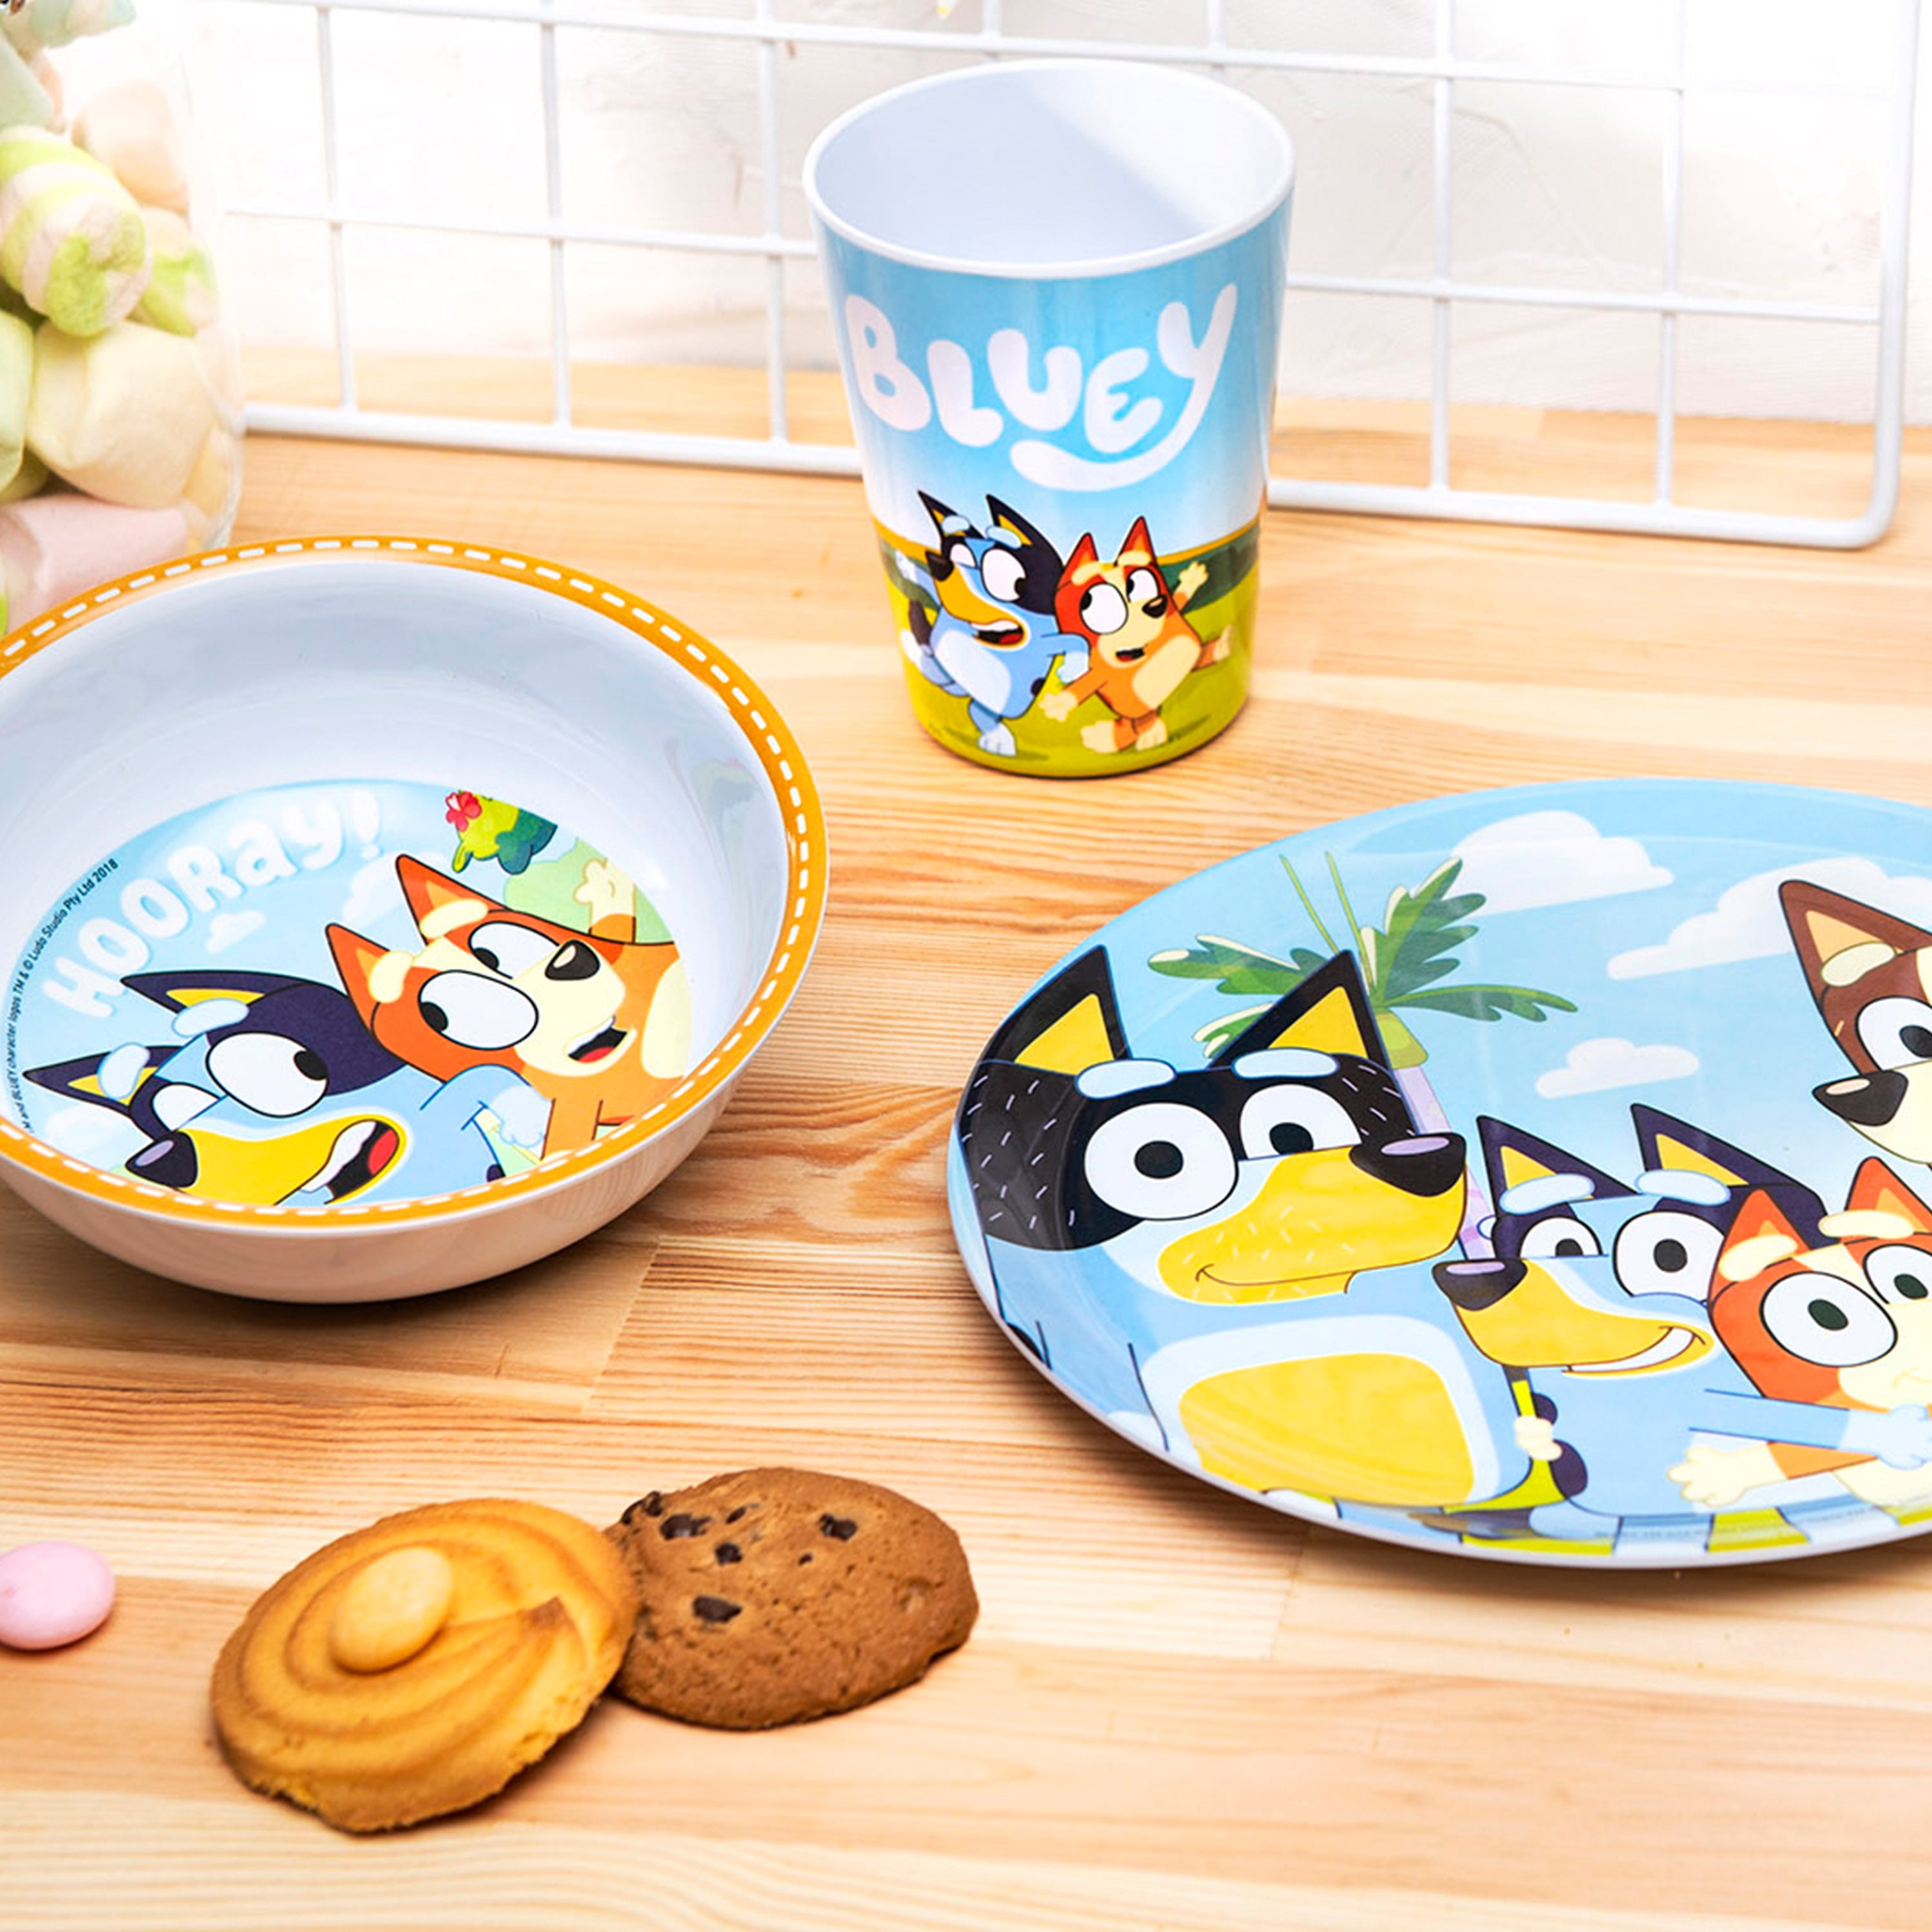 Zak Designs Bluey Kids Dinnerware Set 3 Pieces, Durable and Sustainable Melamine Bamboo Plate, Bowl, and Tumbler Are Perfect for Dinner Time with